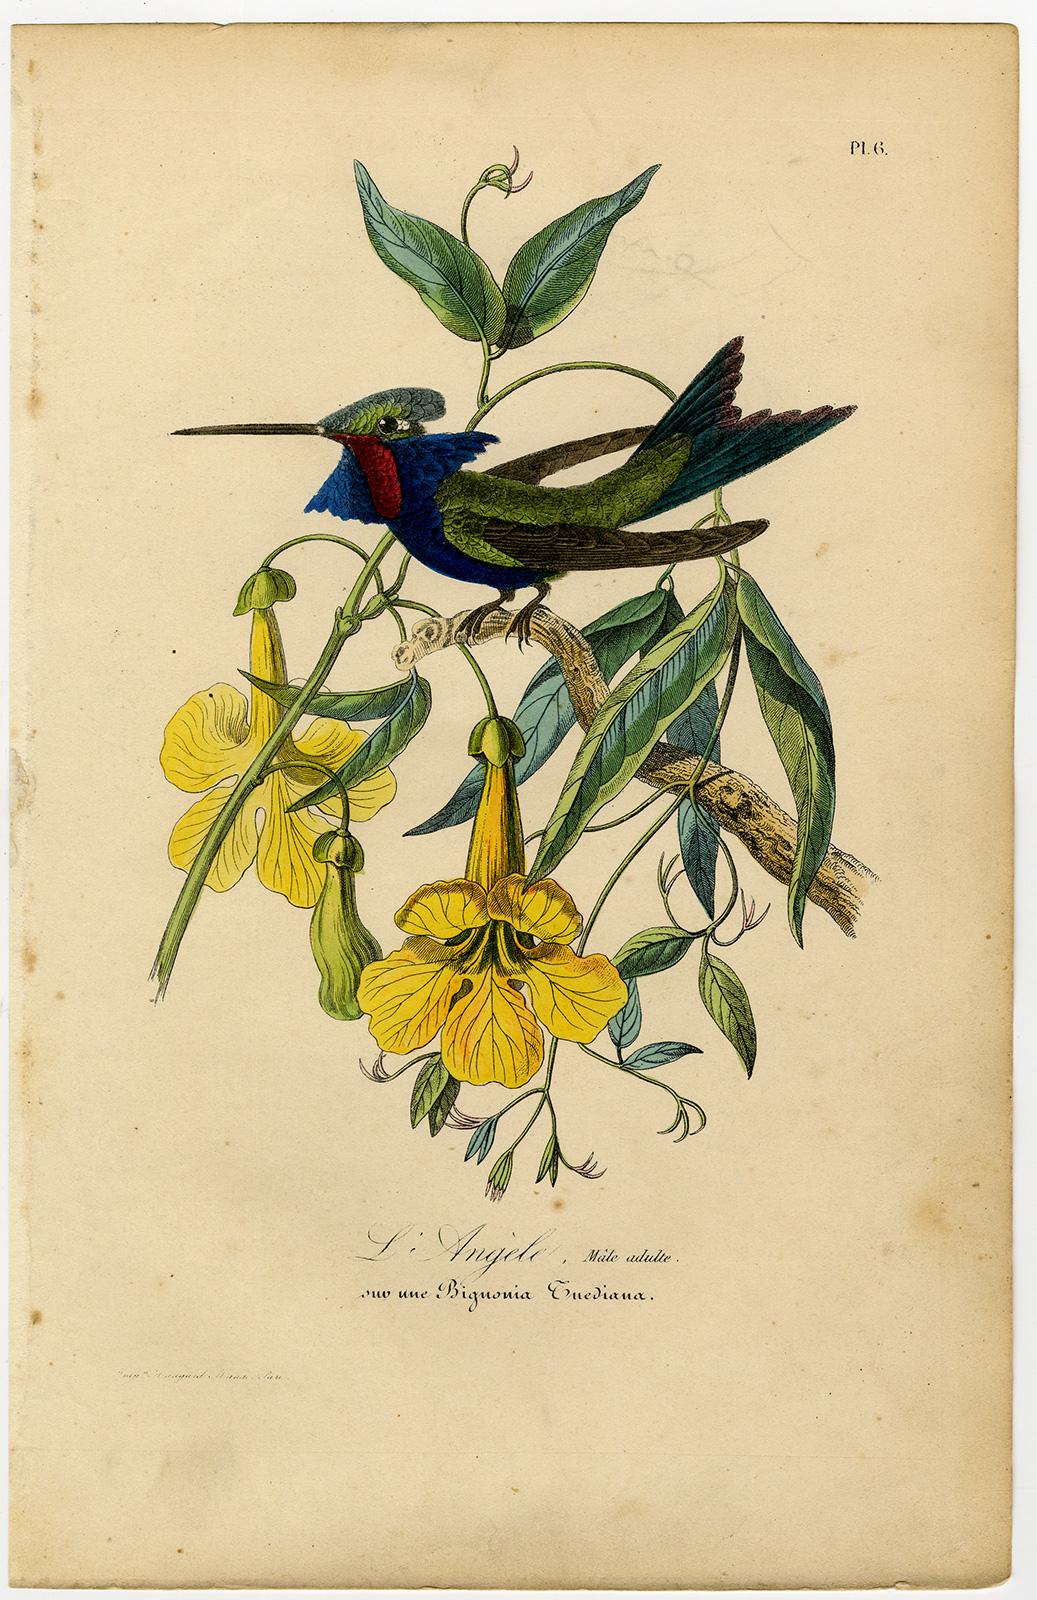 Decorative print of a hummingbird on bignonia by Le Maout - Engraving - 19th c. - Print by Jean-Emmanuel-Marie Le Maout